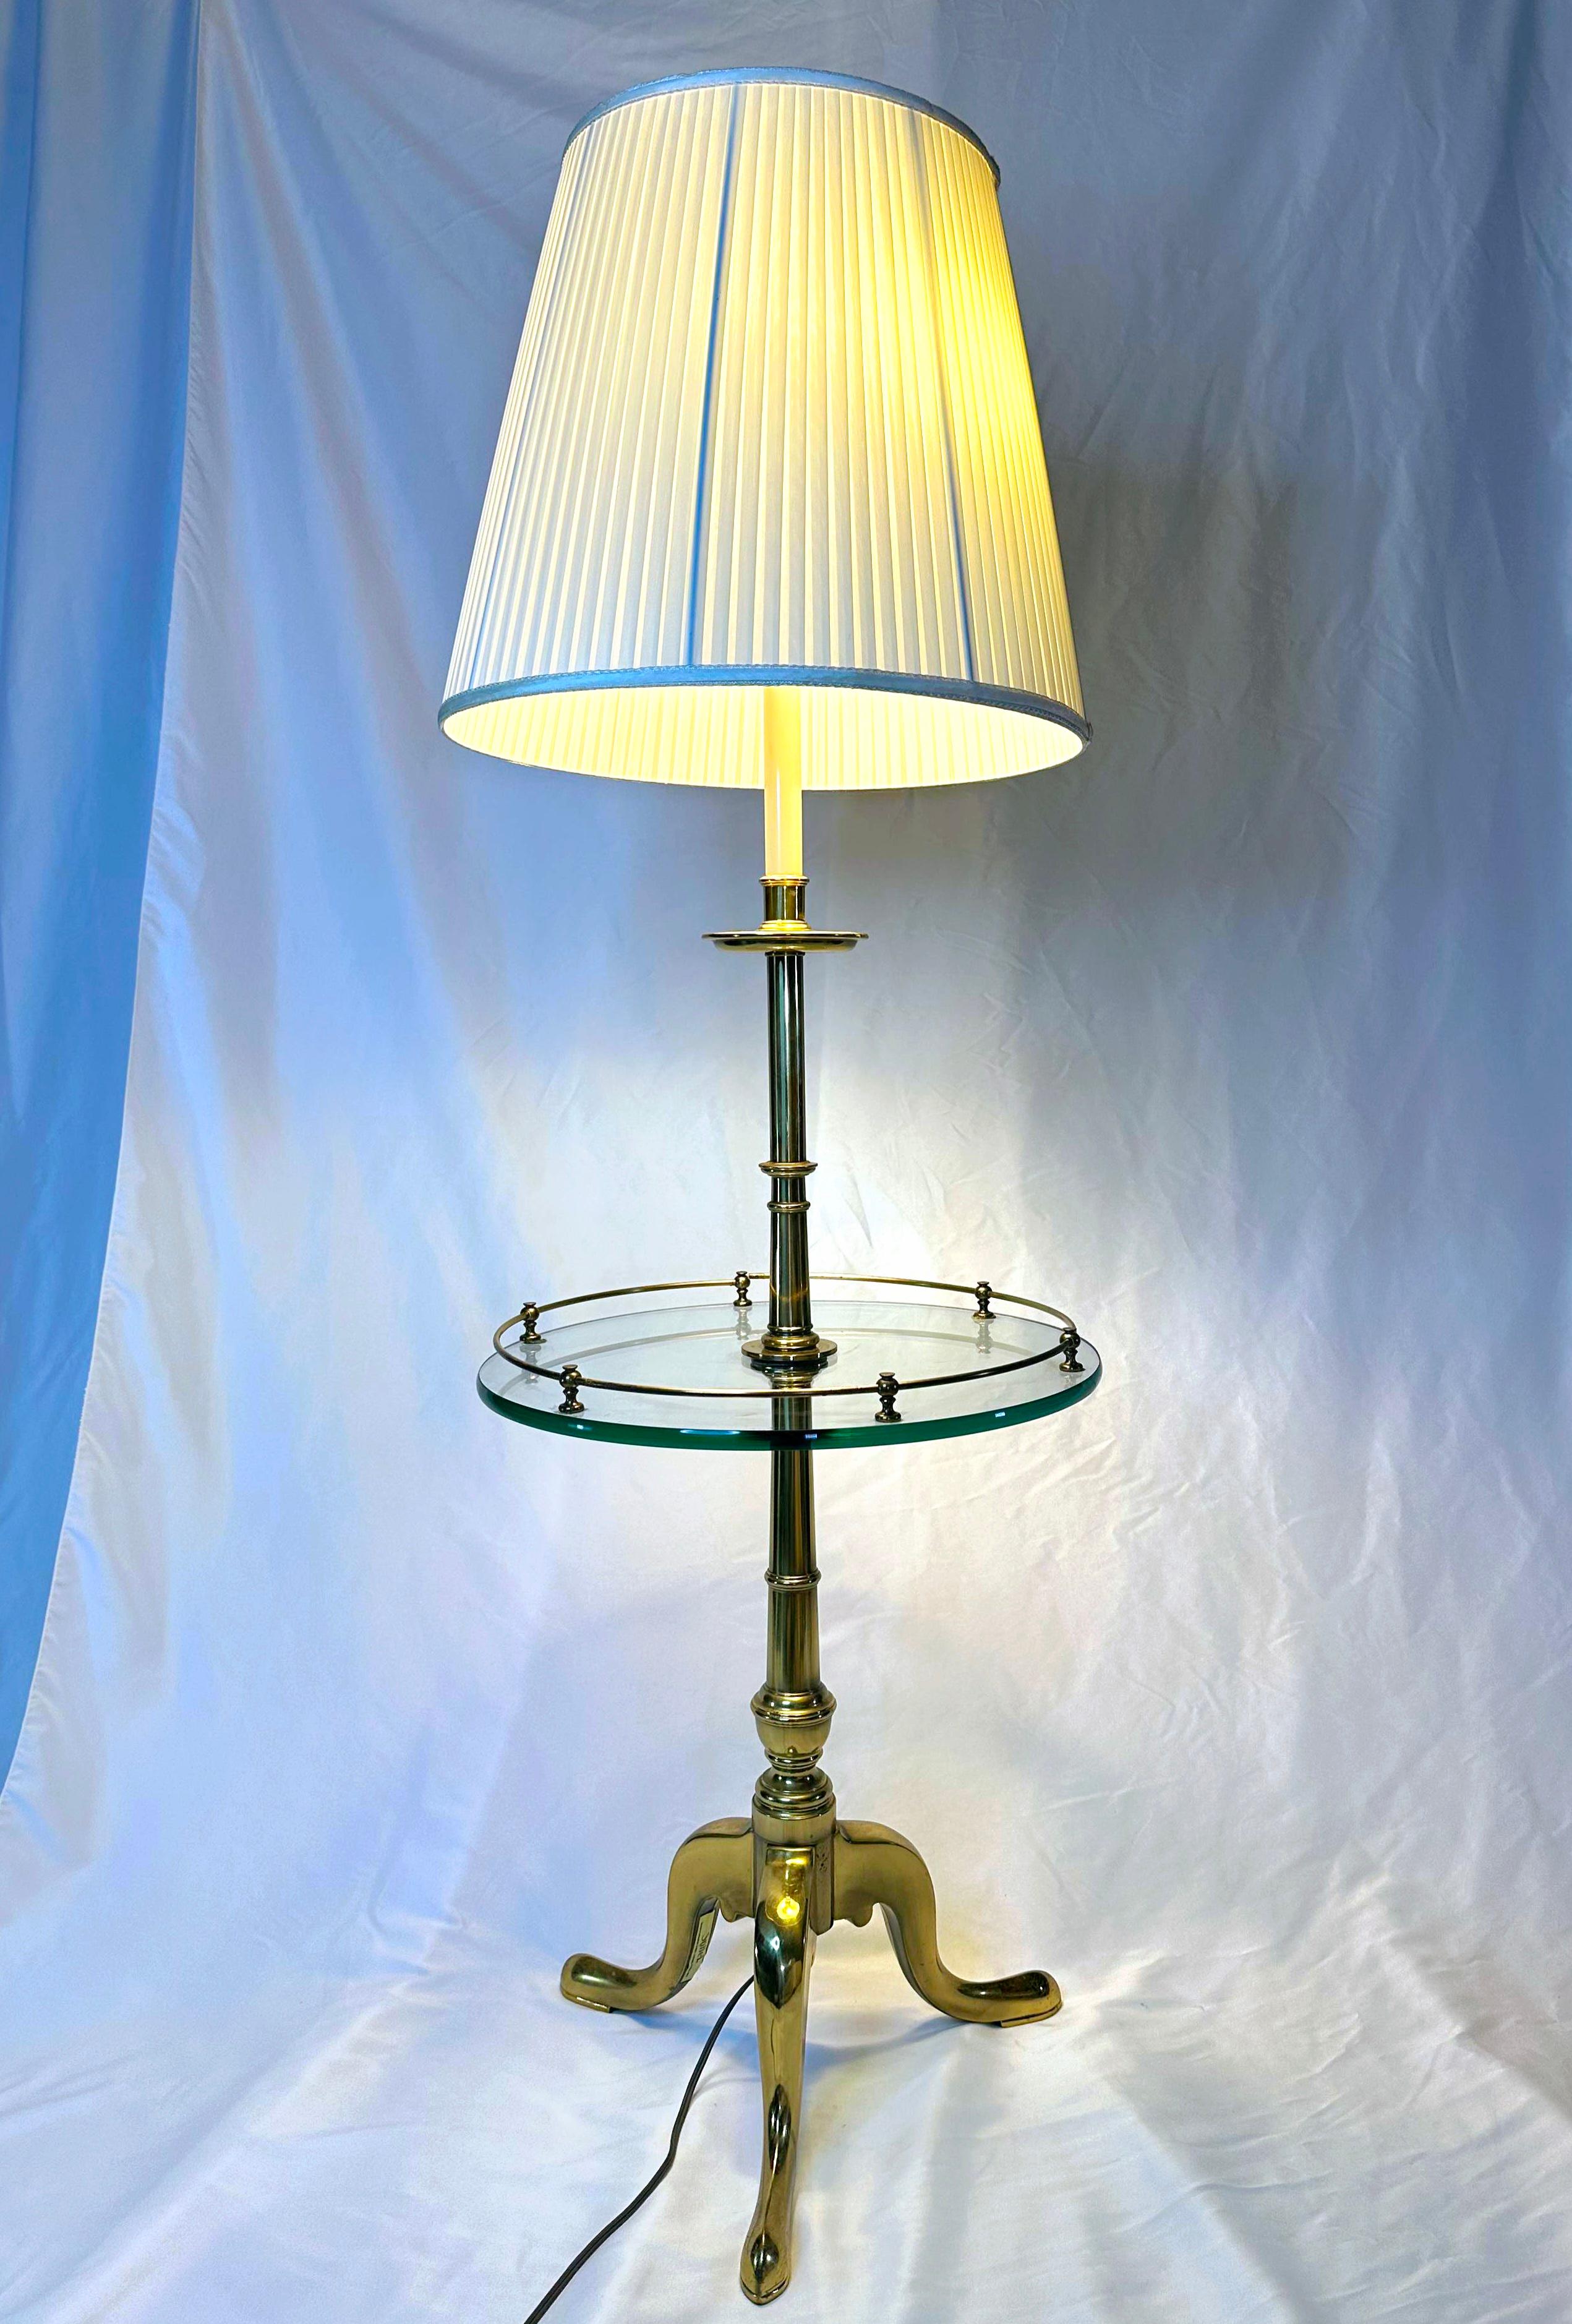 French Provincial Stiffel Floor Lamp With Glass Table and tripod legs 2